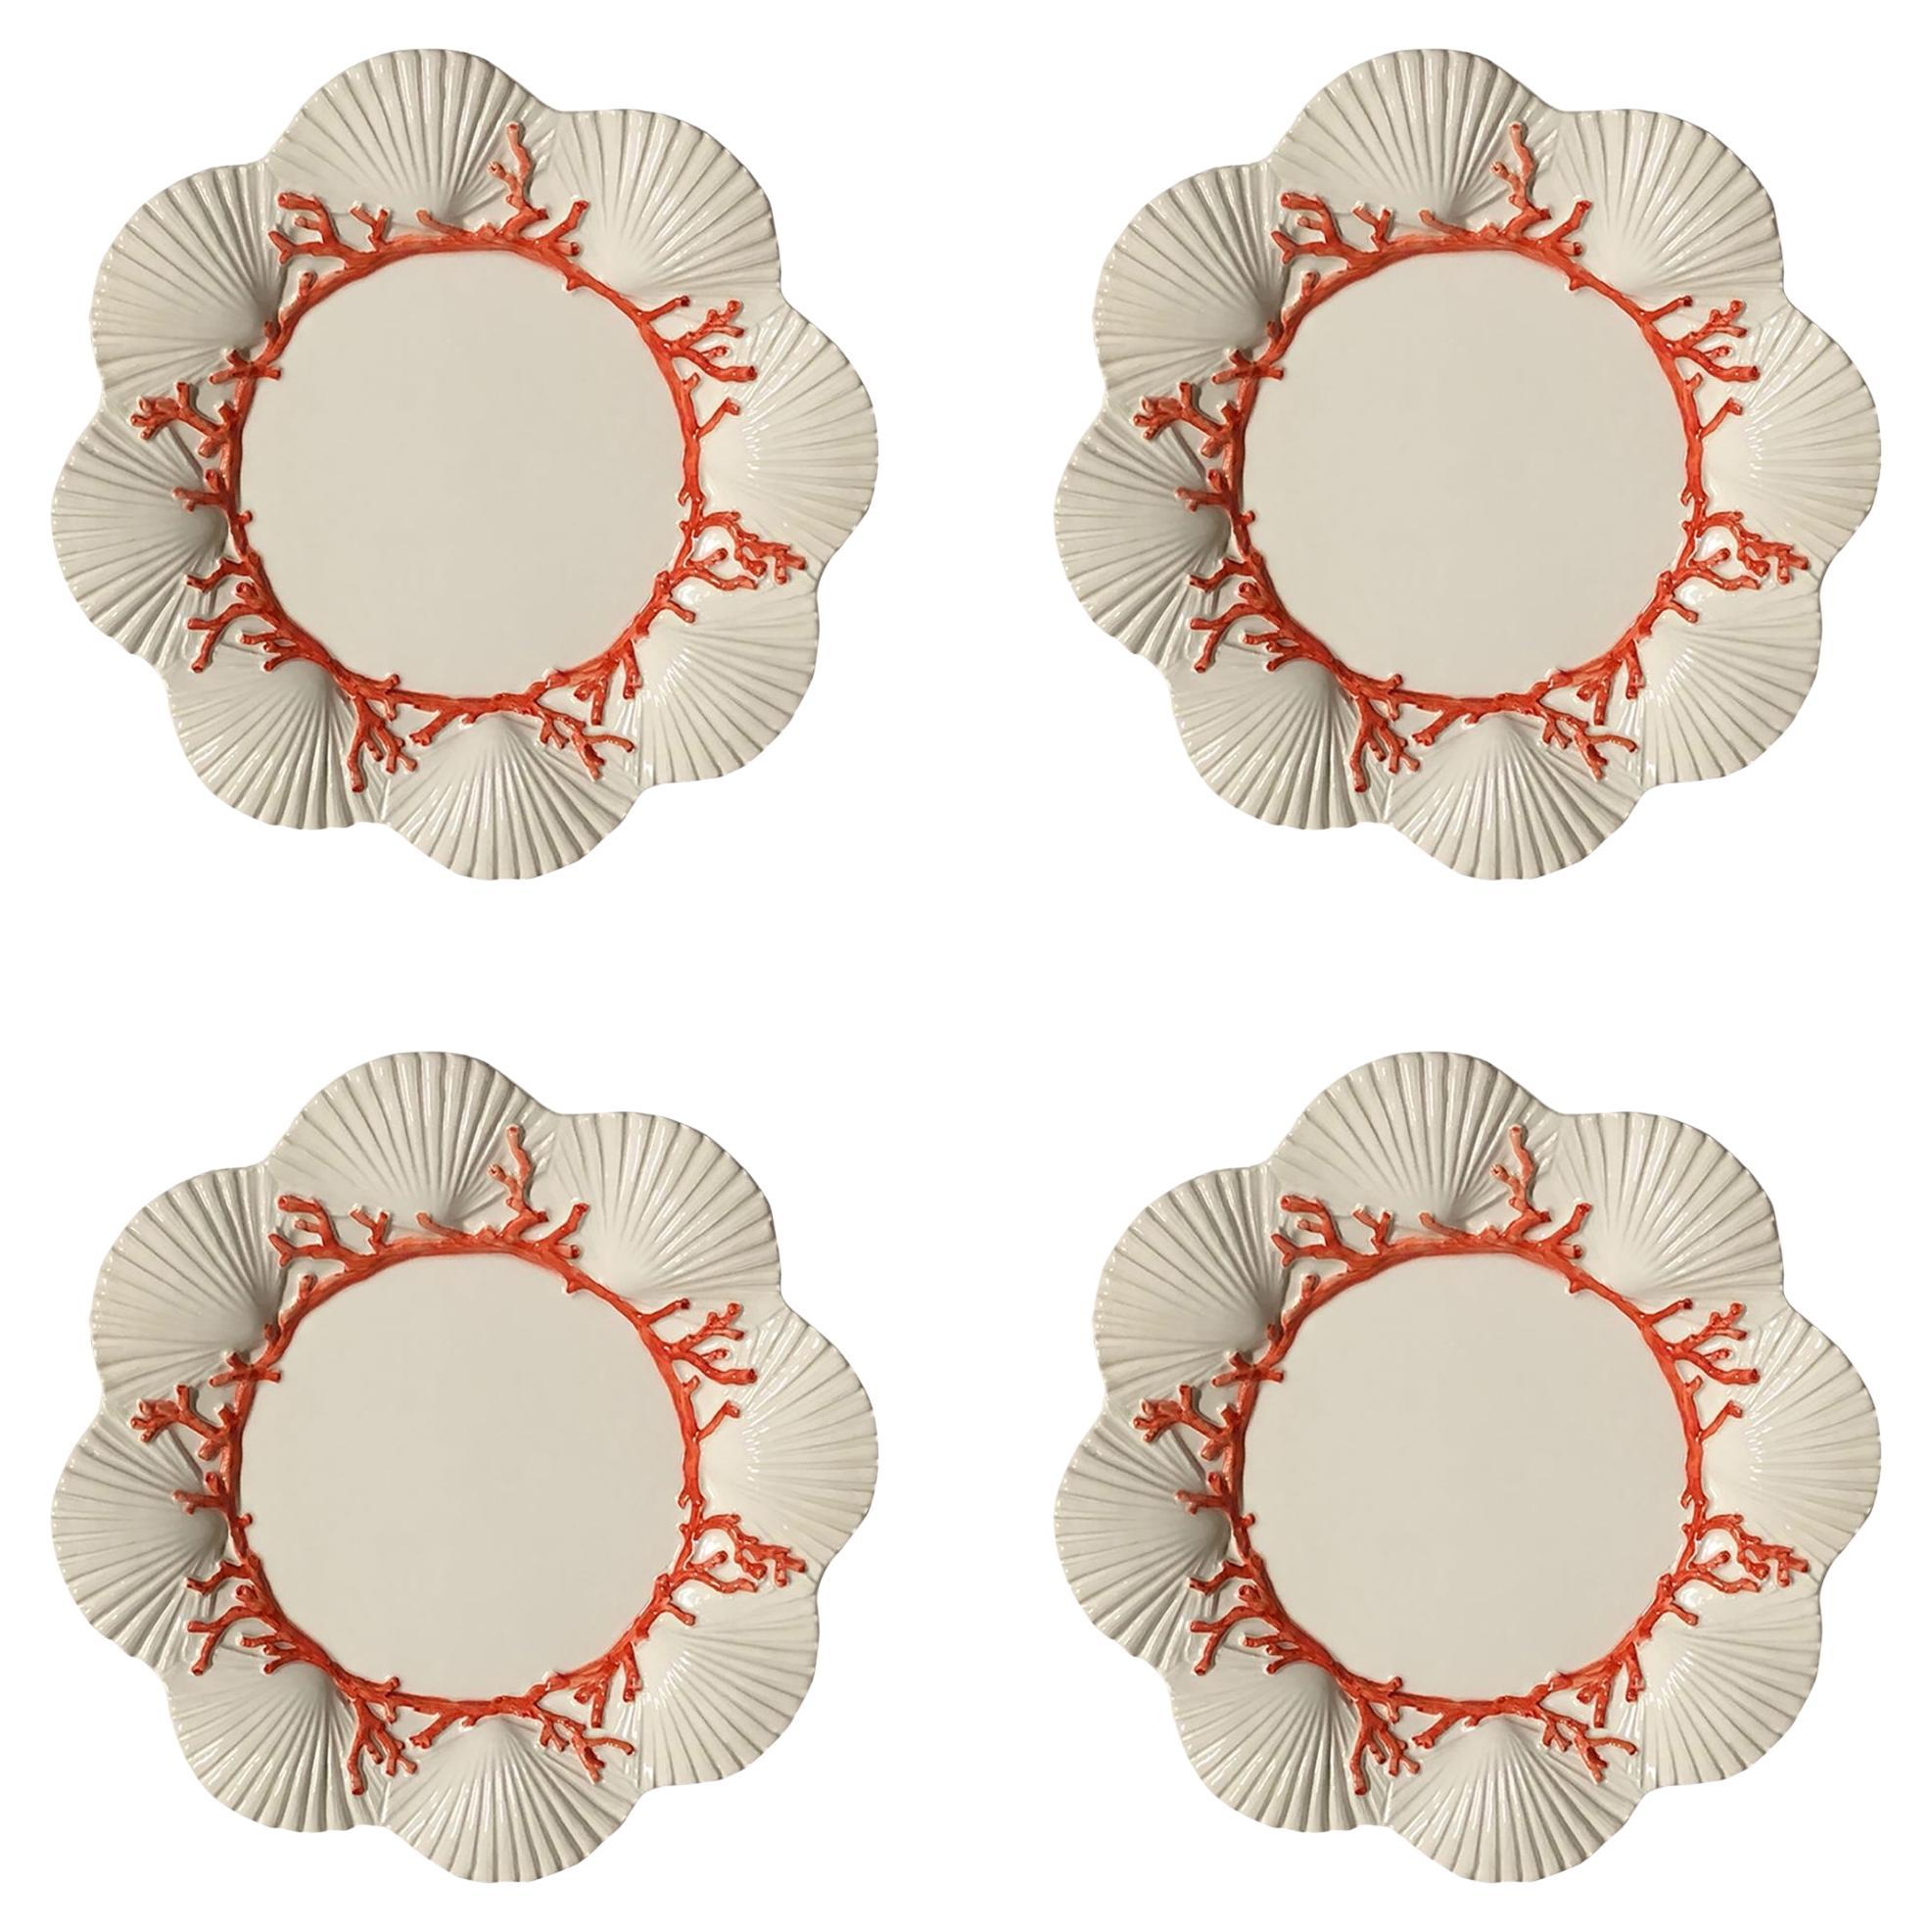 Saint Jacques shells Handpainted Salad Plates Set of 4 Made in Italy